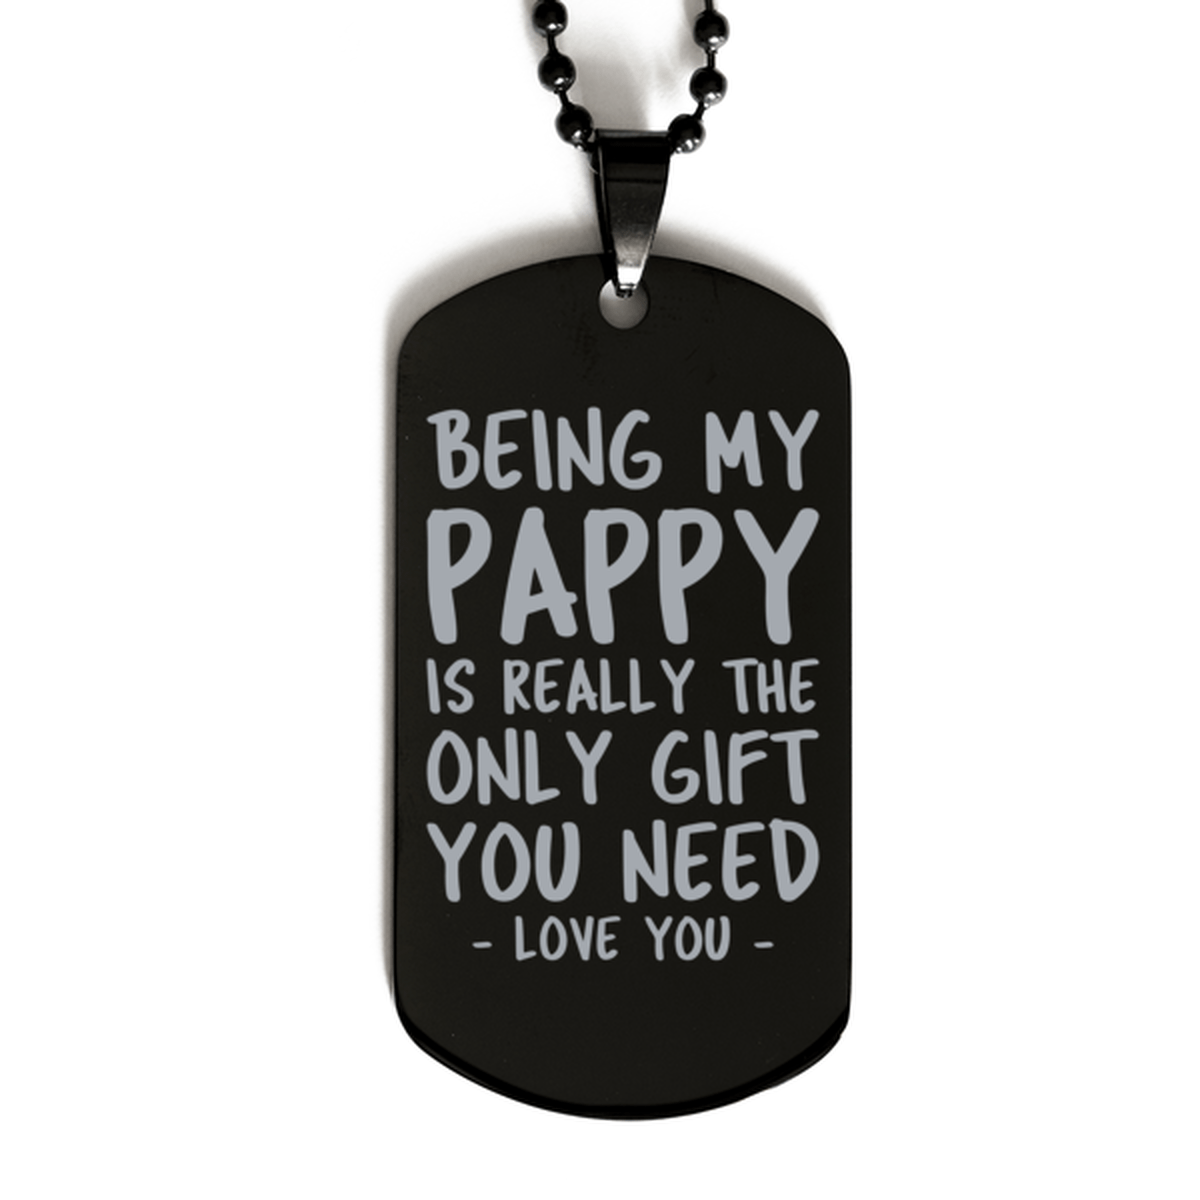 Funny Pappy Black Dog Tag Necklace, Being My Pappy Is Really the Only Gift You Need, Best Birthday Gifts for Pappy